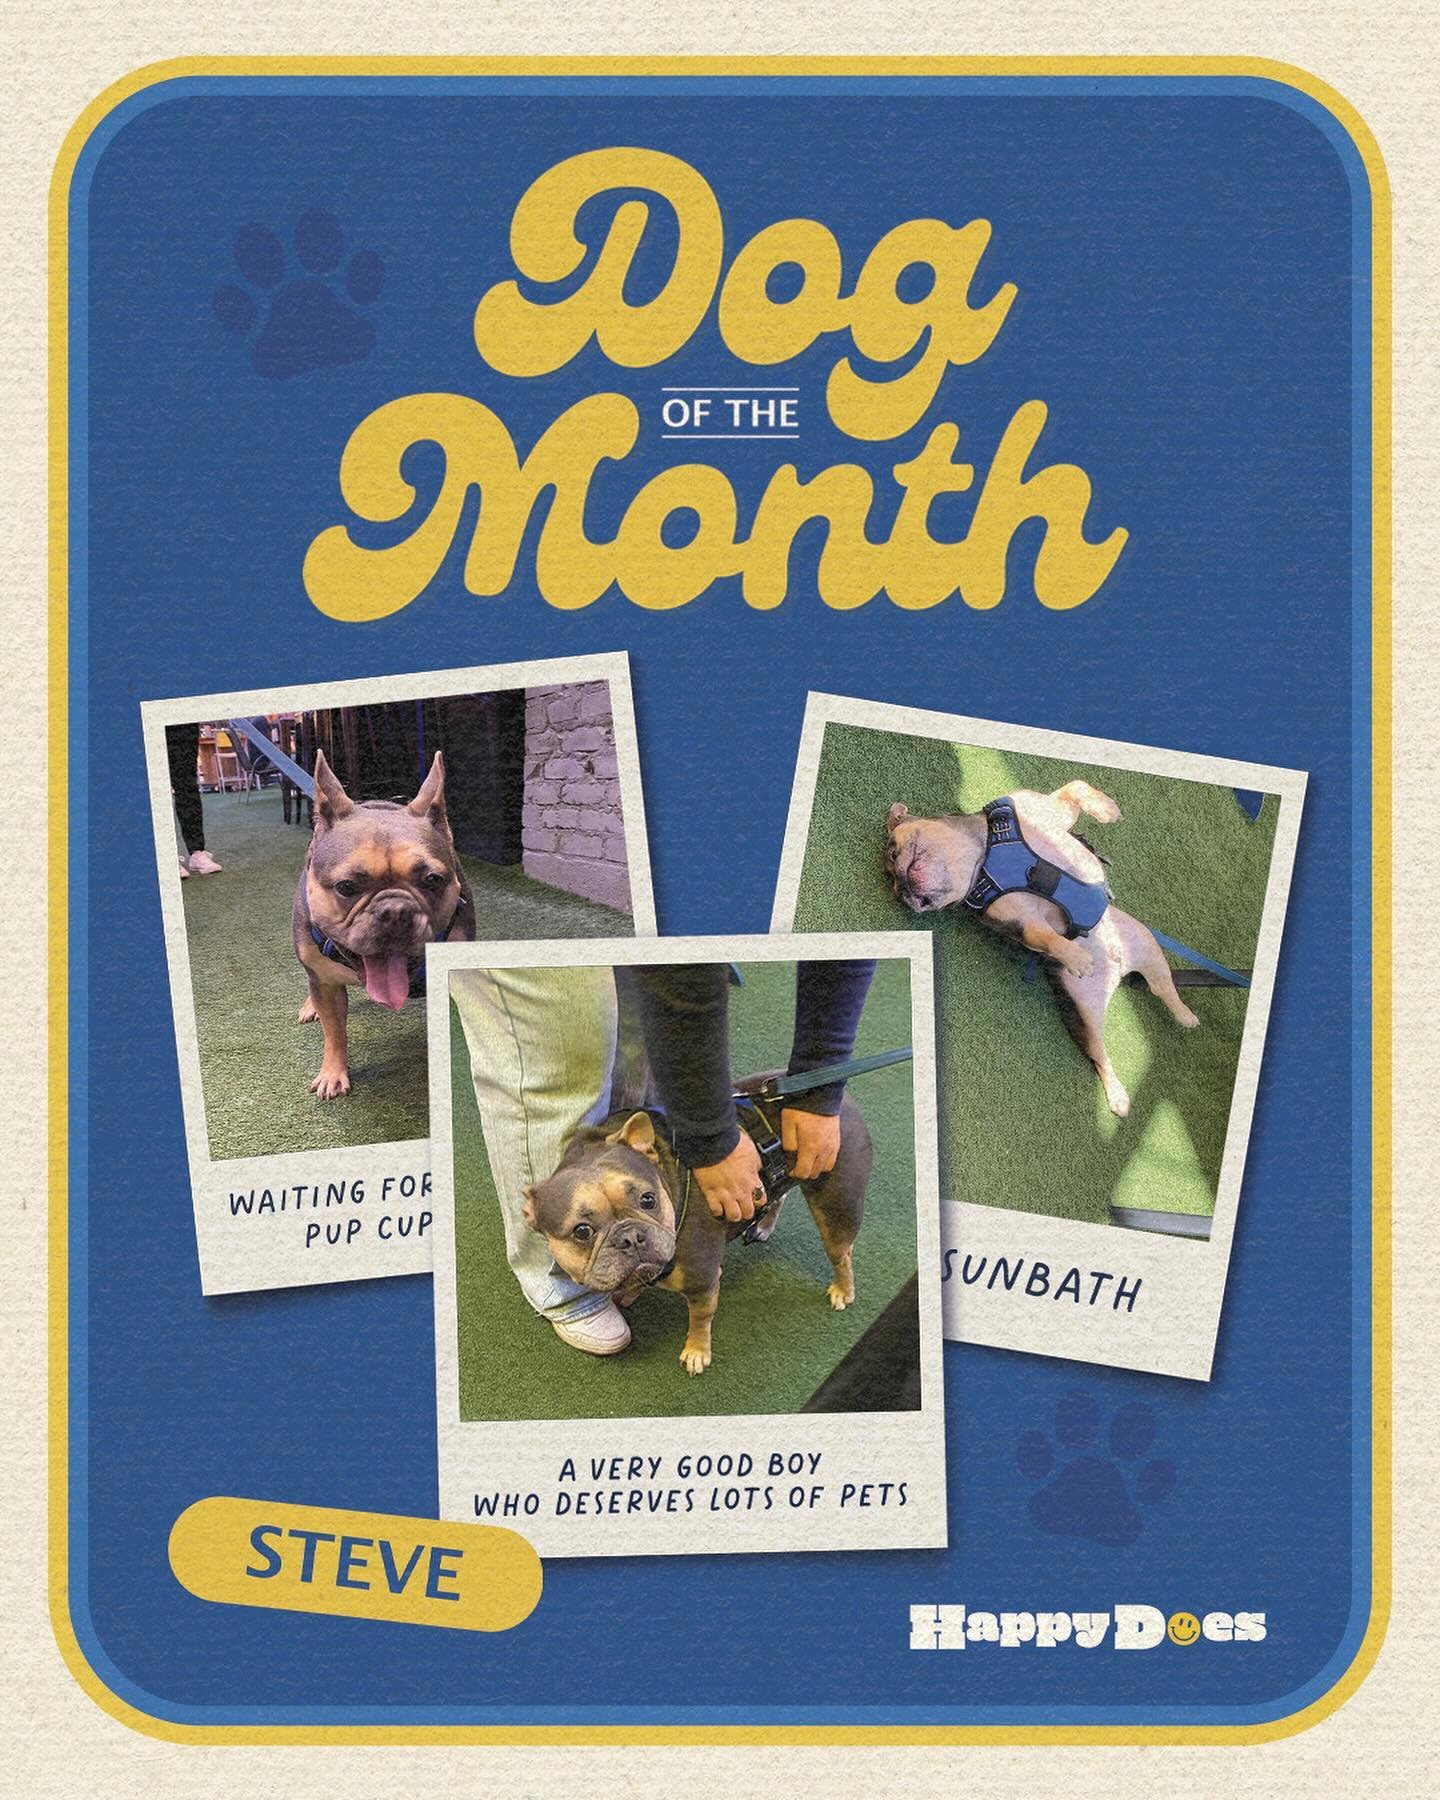 Our May Dog of the Month is STEVE!! 🐶☀️ Fun fact: Steve is an OG Happy Dog. He was one of our first customers! He loves Pup Cups (duh), sunbathing and dragging his mom around Happy so he can say hi to as many people as possible. No complaints here! 